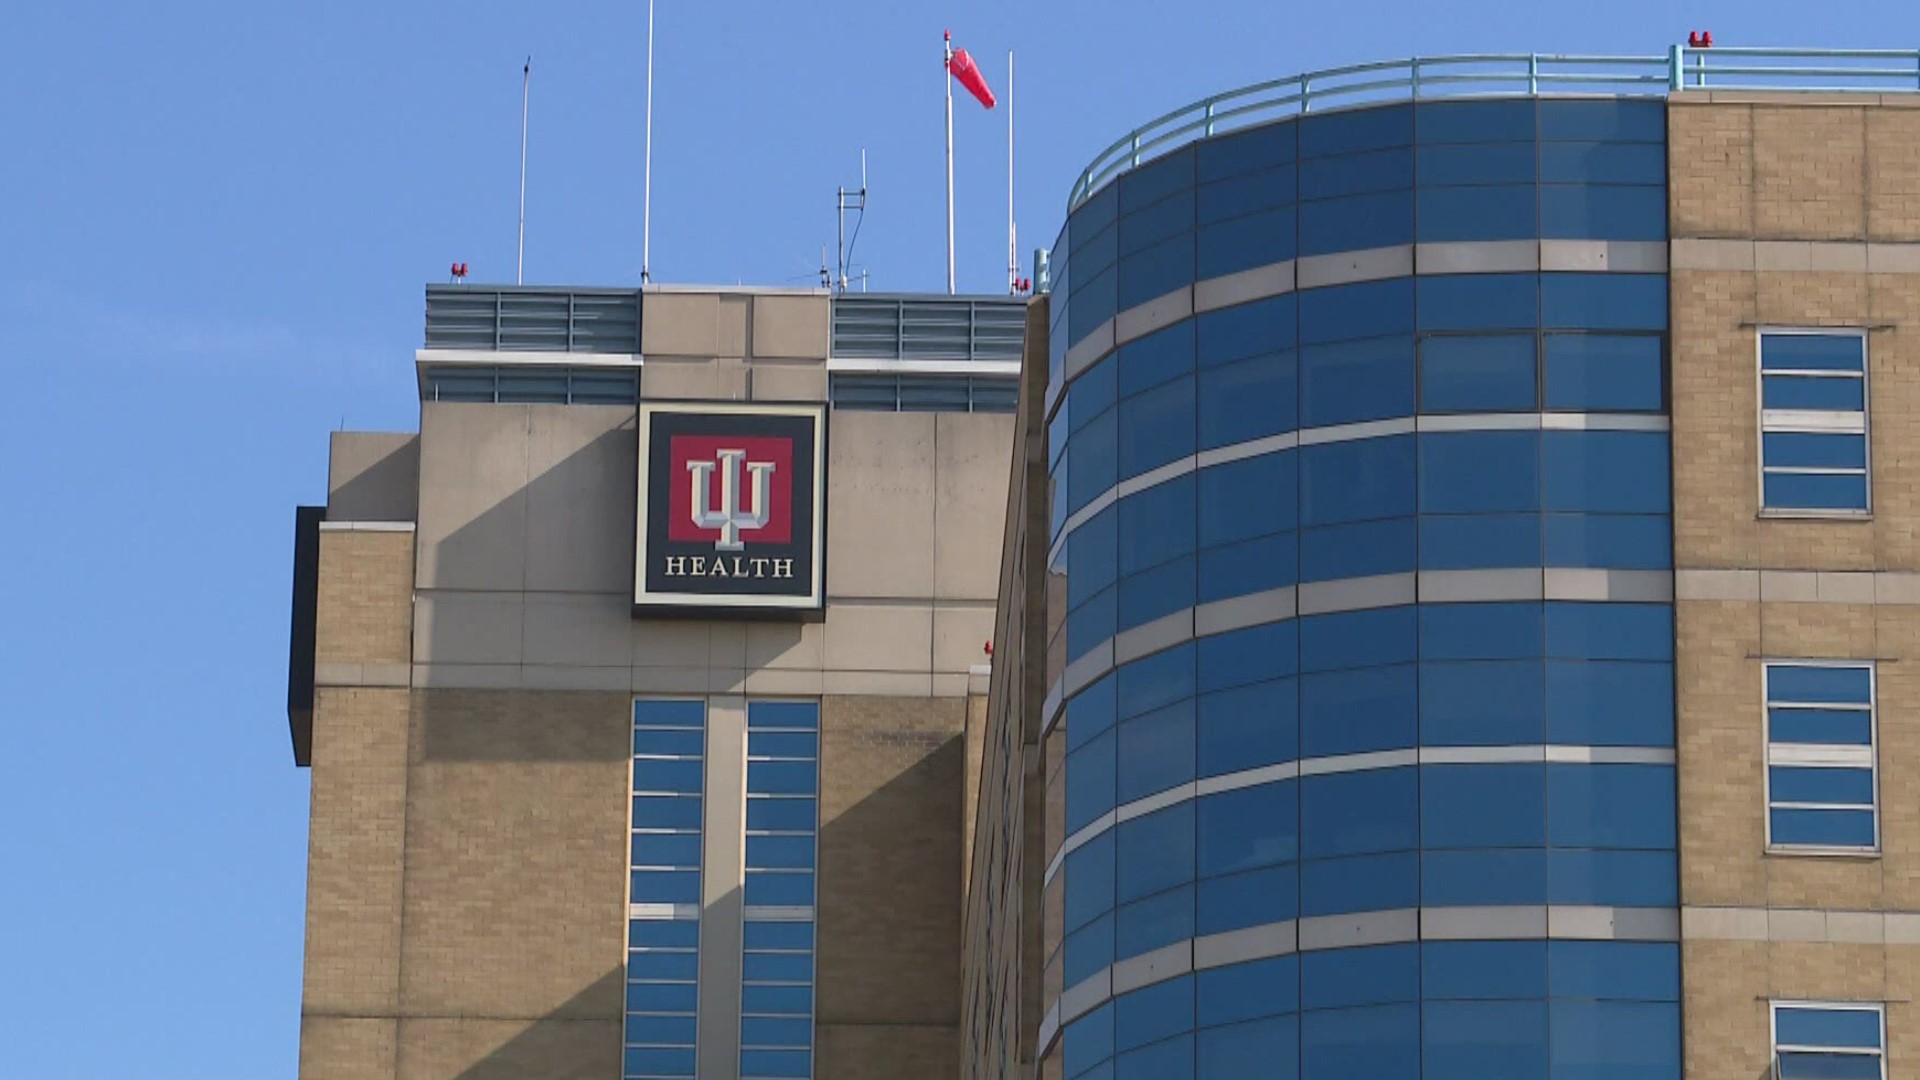 IU Health said its 16 hospitals are at or nearing capacity with the surge in COVID-19 cases.